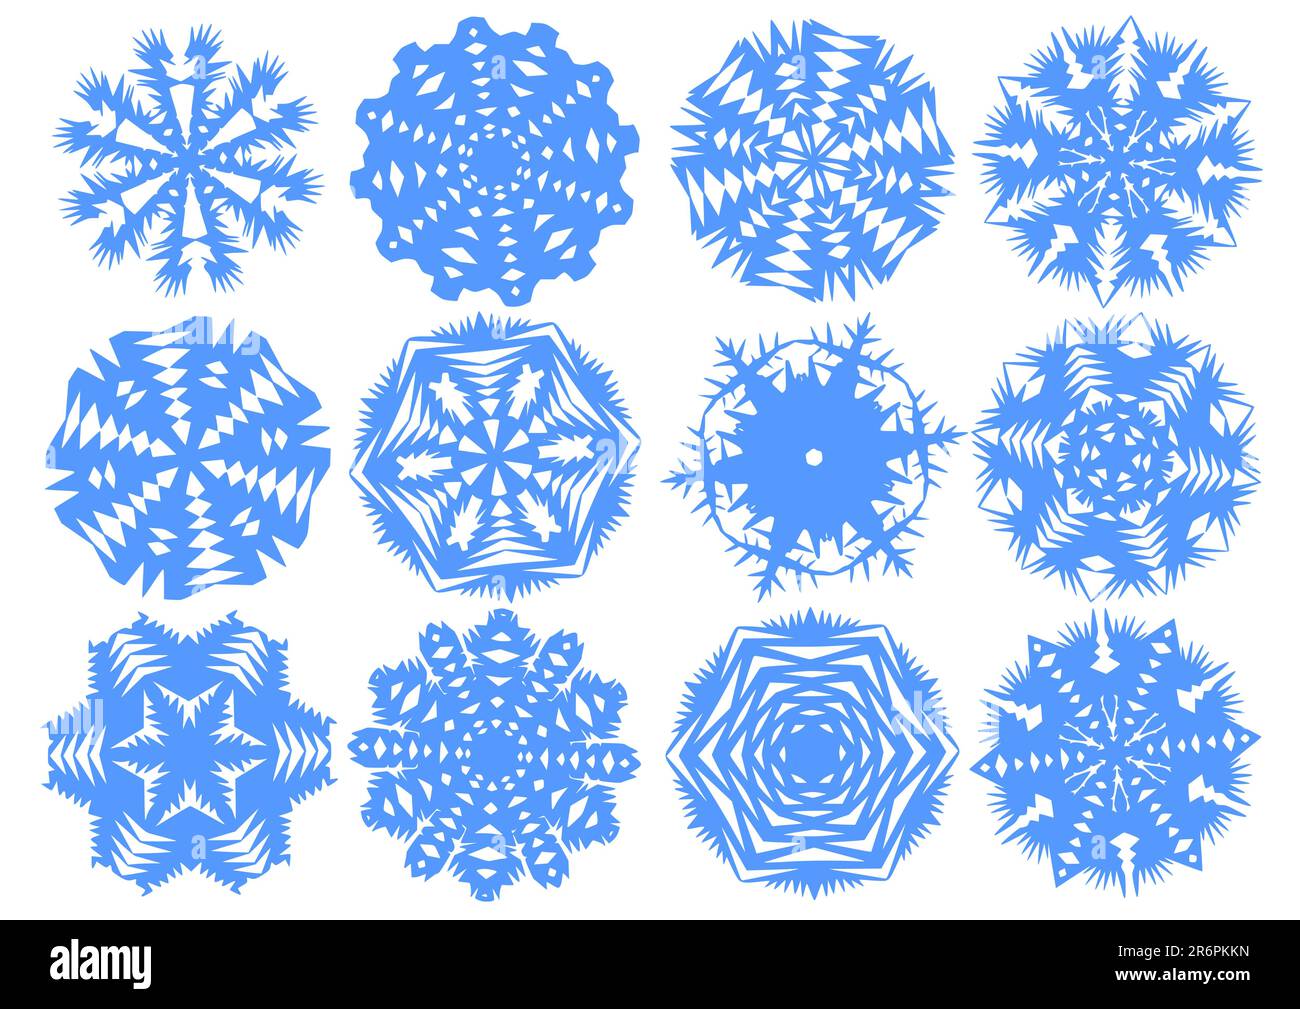 Snowflakes, white vector snowflakes on a blue background Stock Vector